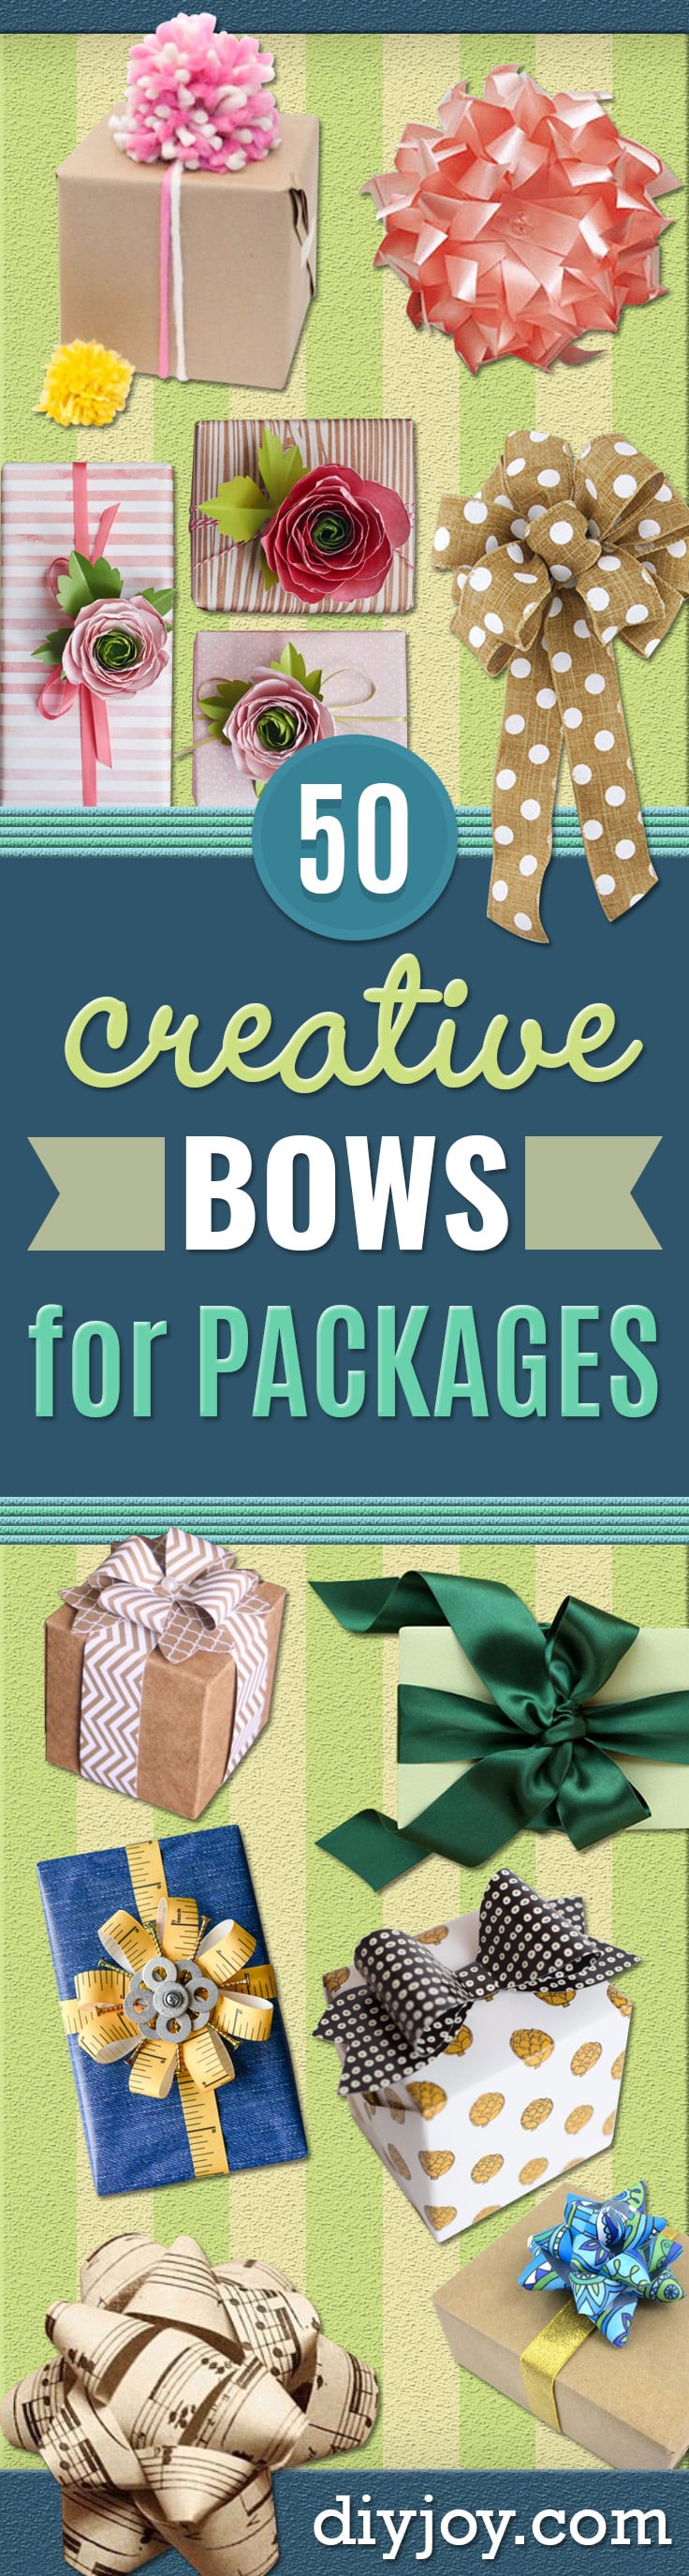 creative bows For gifts and xmas packages - Make DIY Bows for Christmas Presents and Holiday Gifts - Cute and Easy Ideas for Making Your Own Bows and Ribbons - Step by Step Tutorials and Instructions for Tying A Bow - Cheap and Crafty Gift Wrapping Ideas on A Budget 